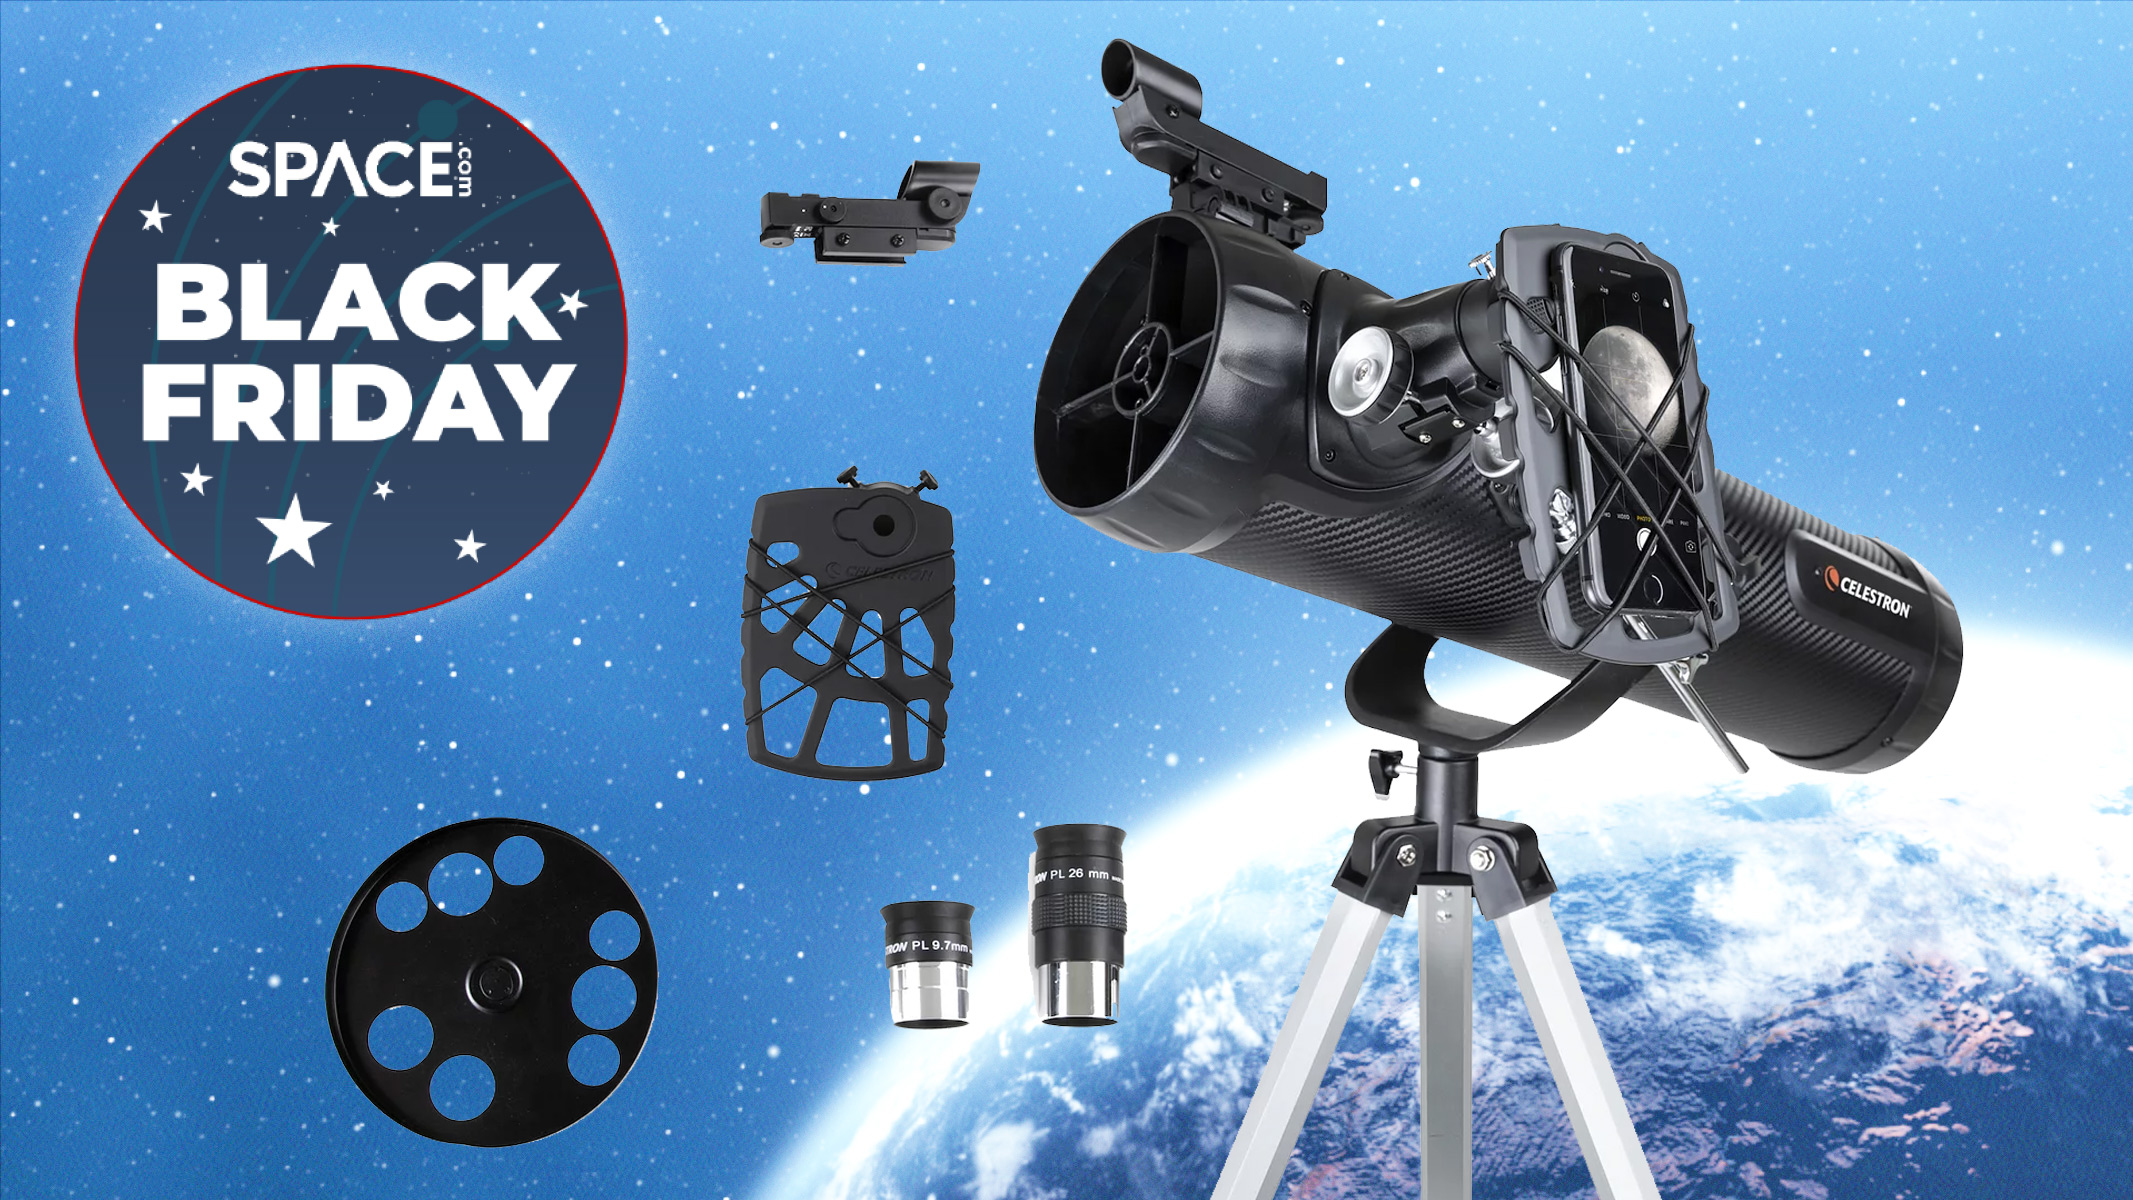 Charotar Globe Daily Celestron astromaster 114az-sr and accessories viewed in front of a space photo of the earth and stars with a black friday deal logo